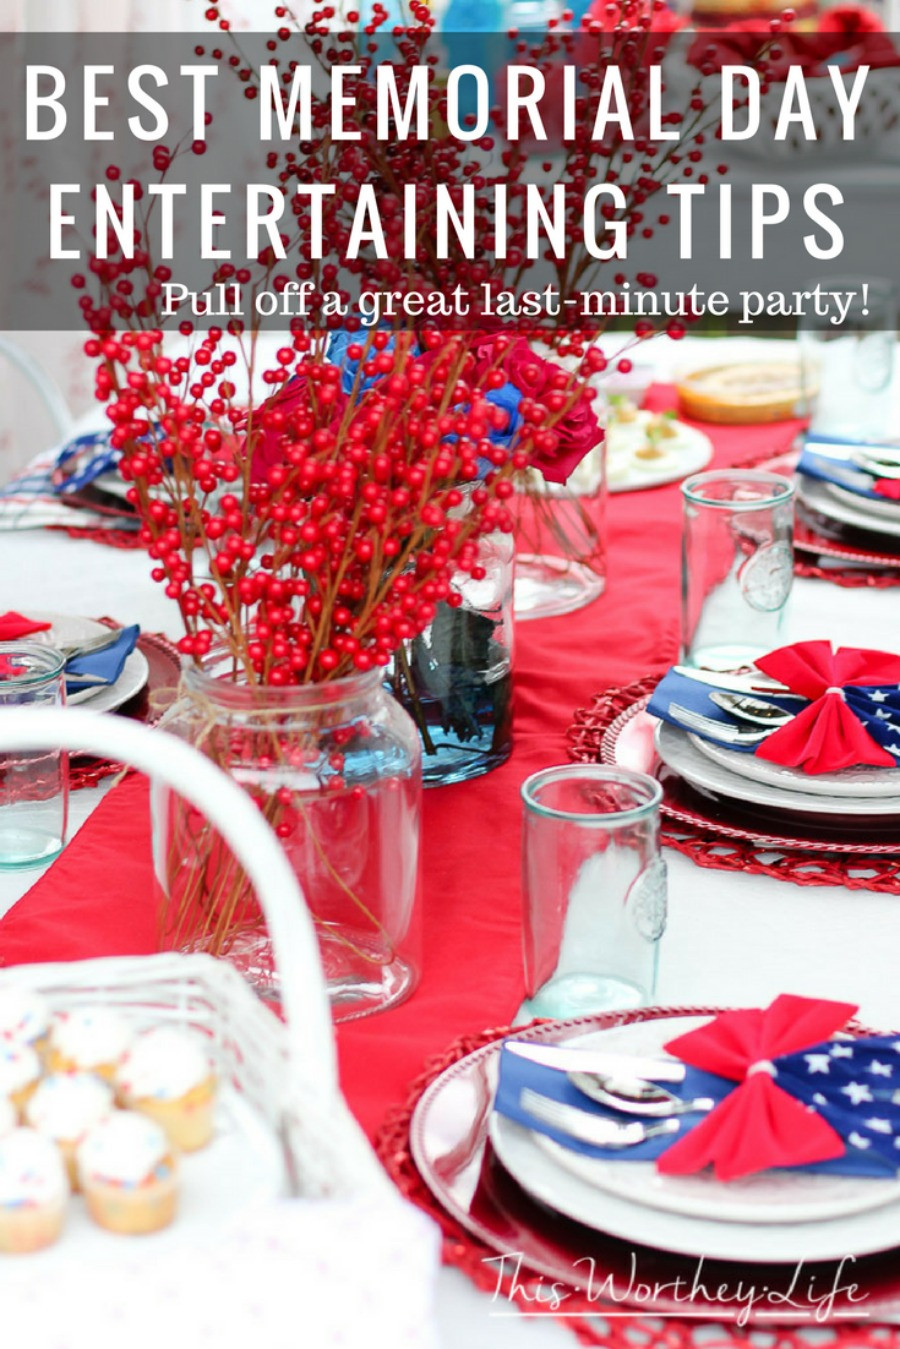 Memorial Day Vacation Ideas
 Best Memorial Day Entertaining Tips Pull off a great last